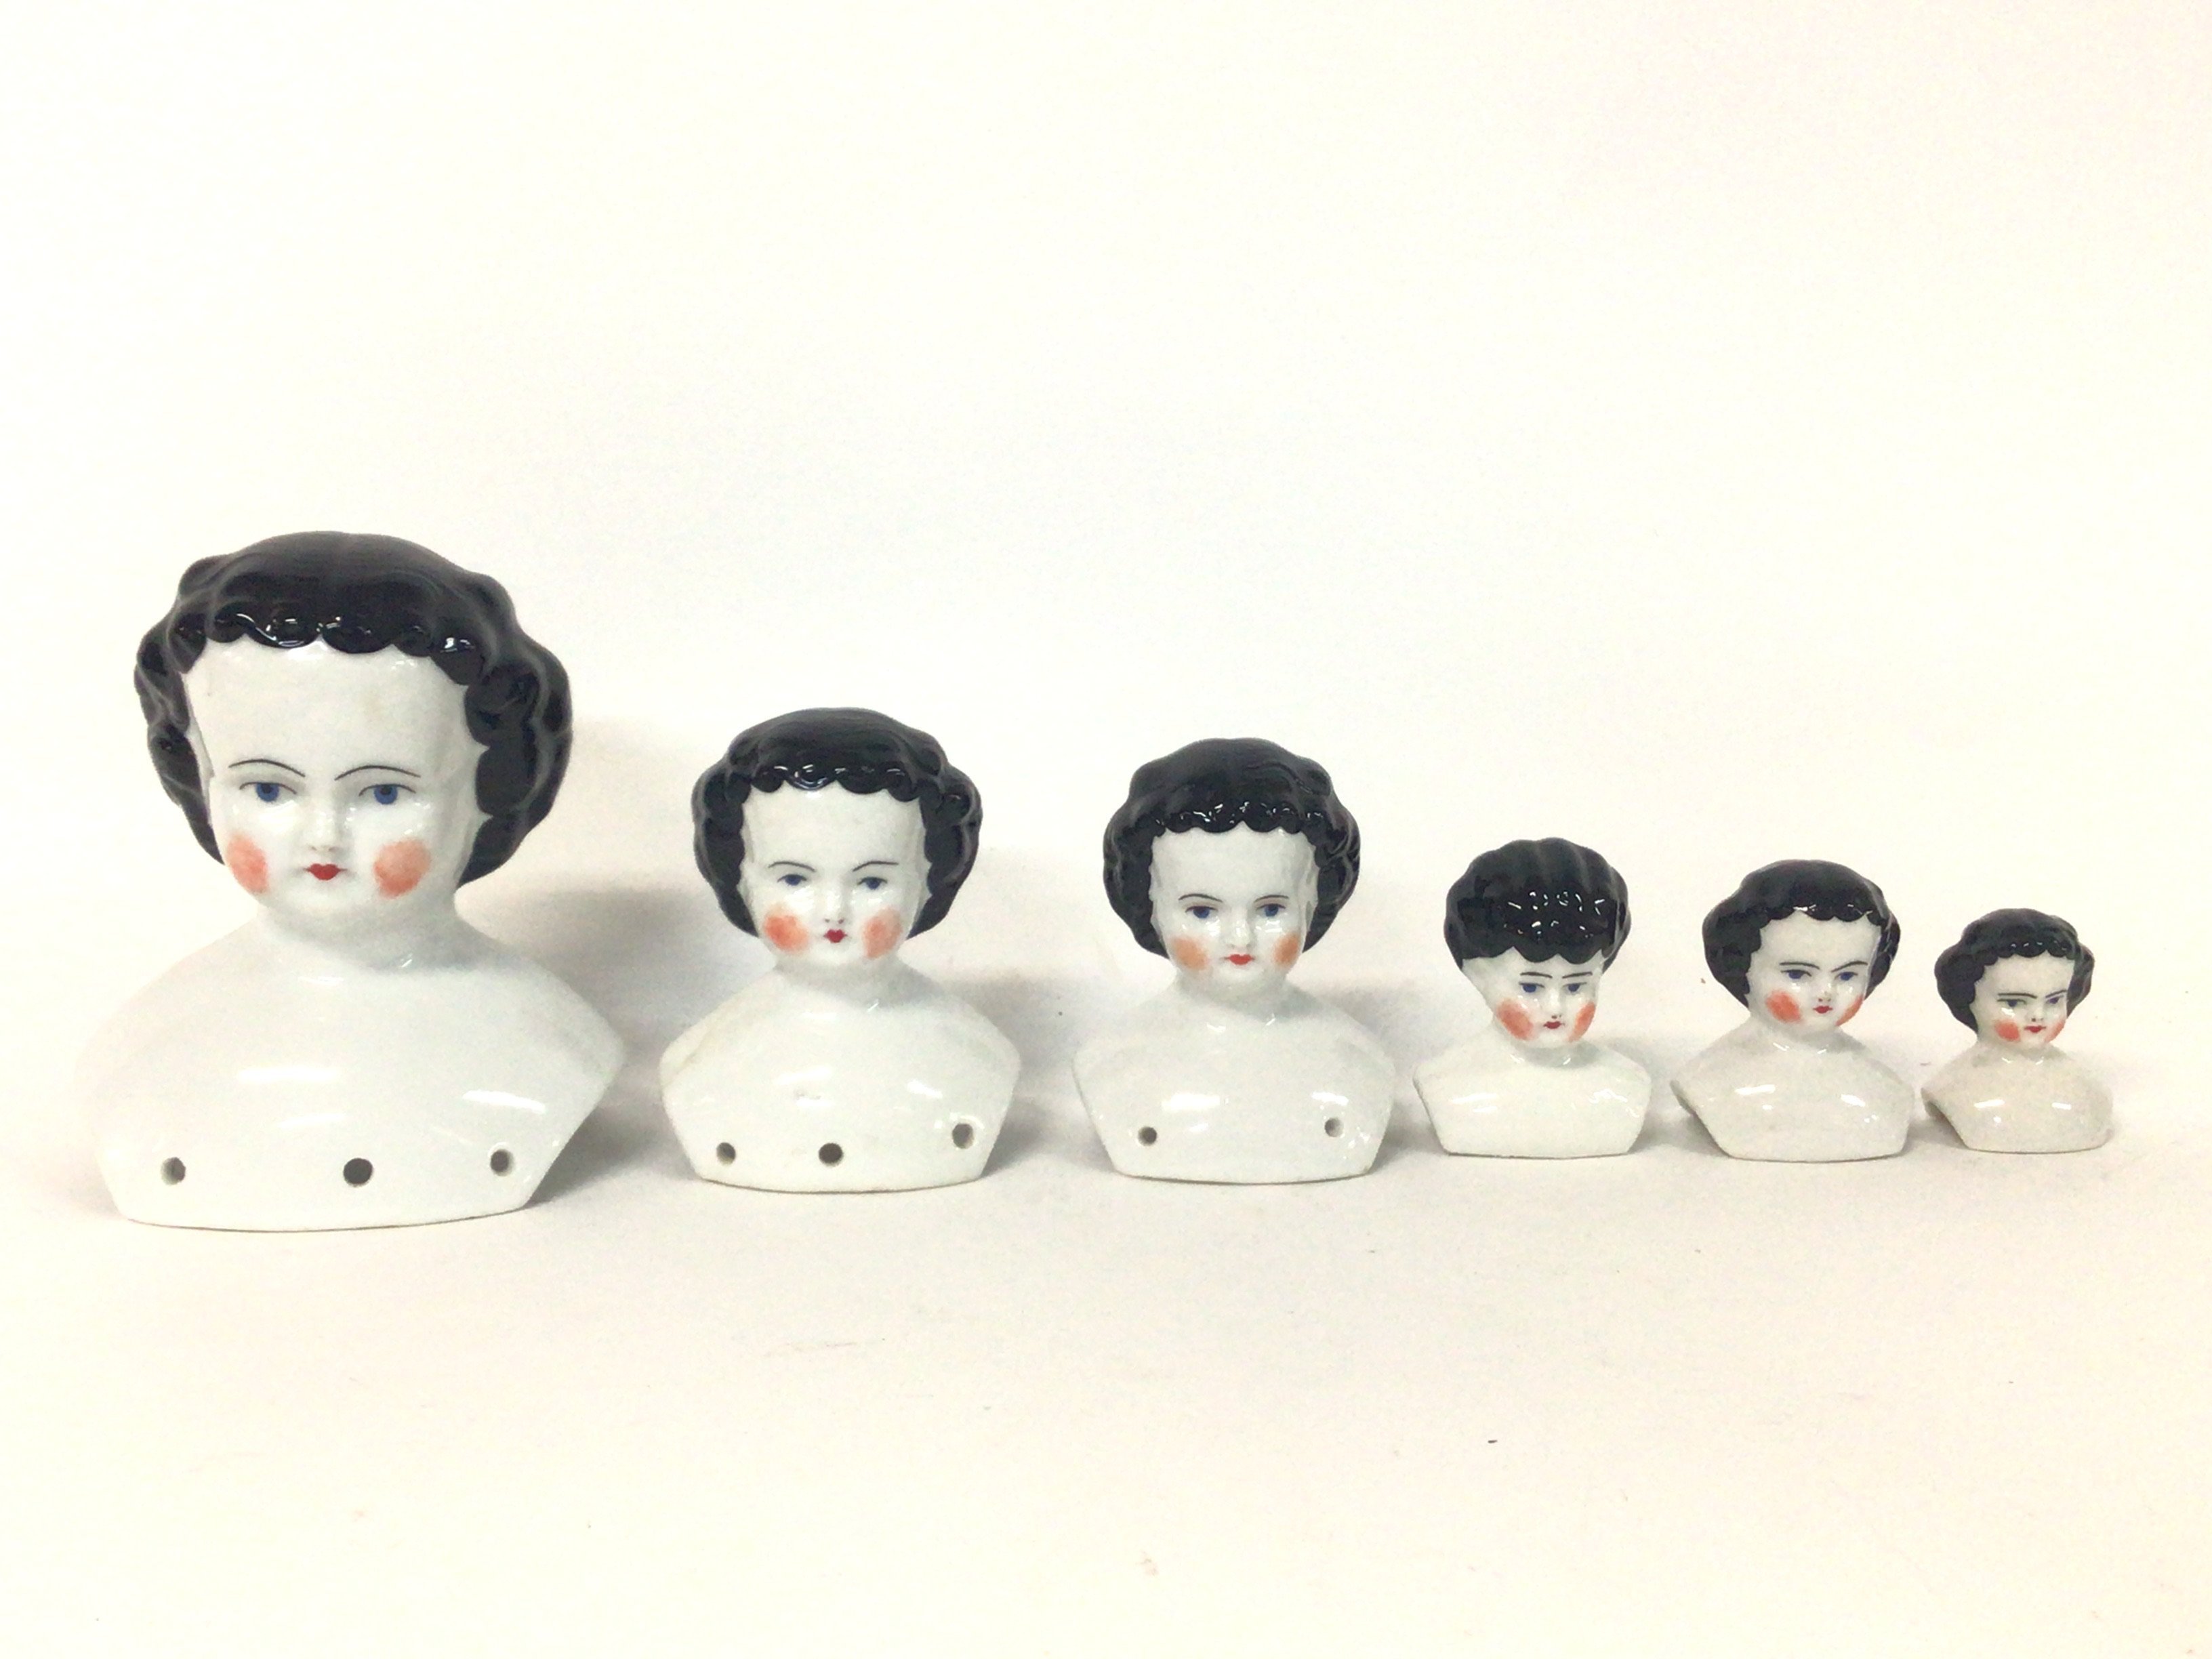 Ceramic doll heads, no obvious signs of restoratio